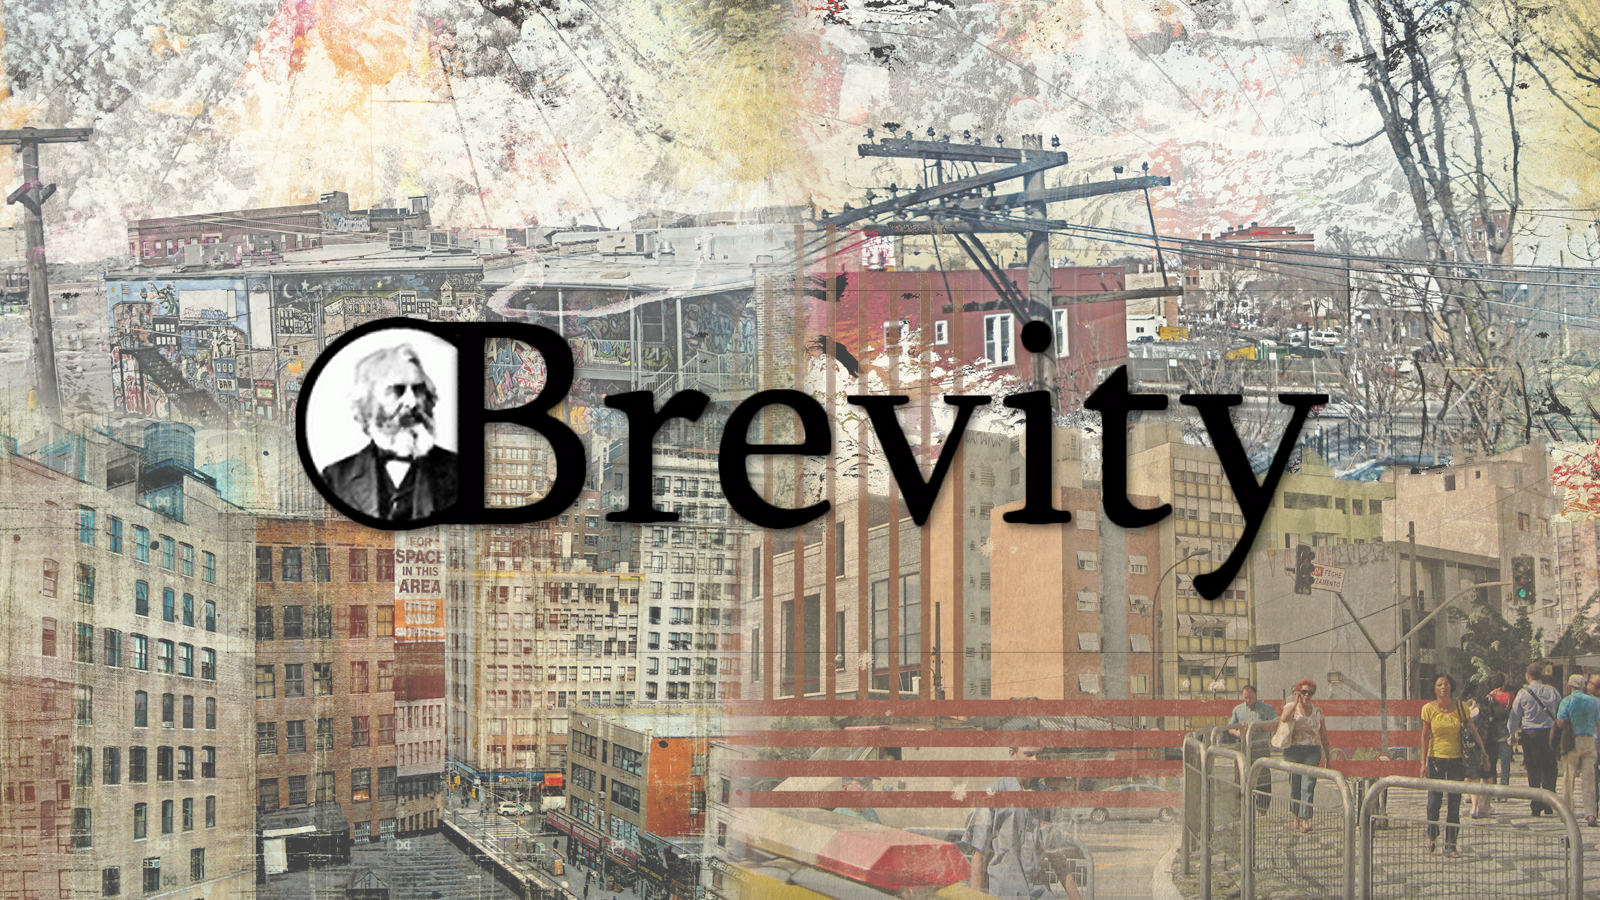 Composite image of urban scenes and art behind the Brevity magazine logo; links to news story